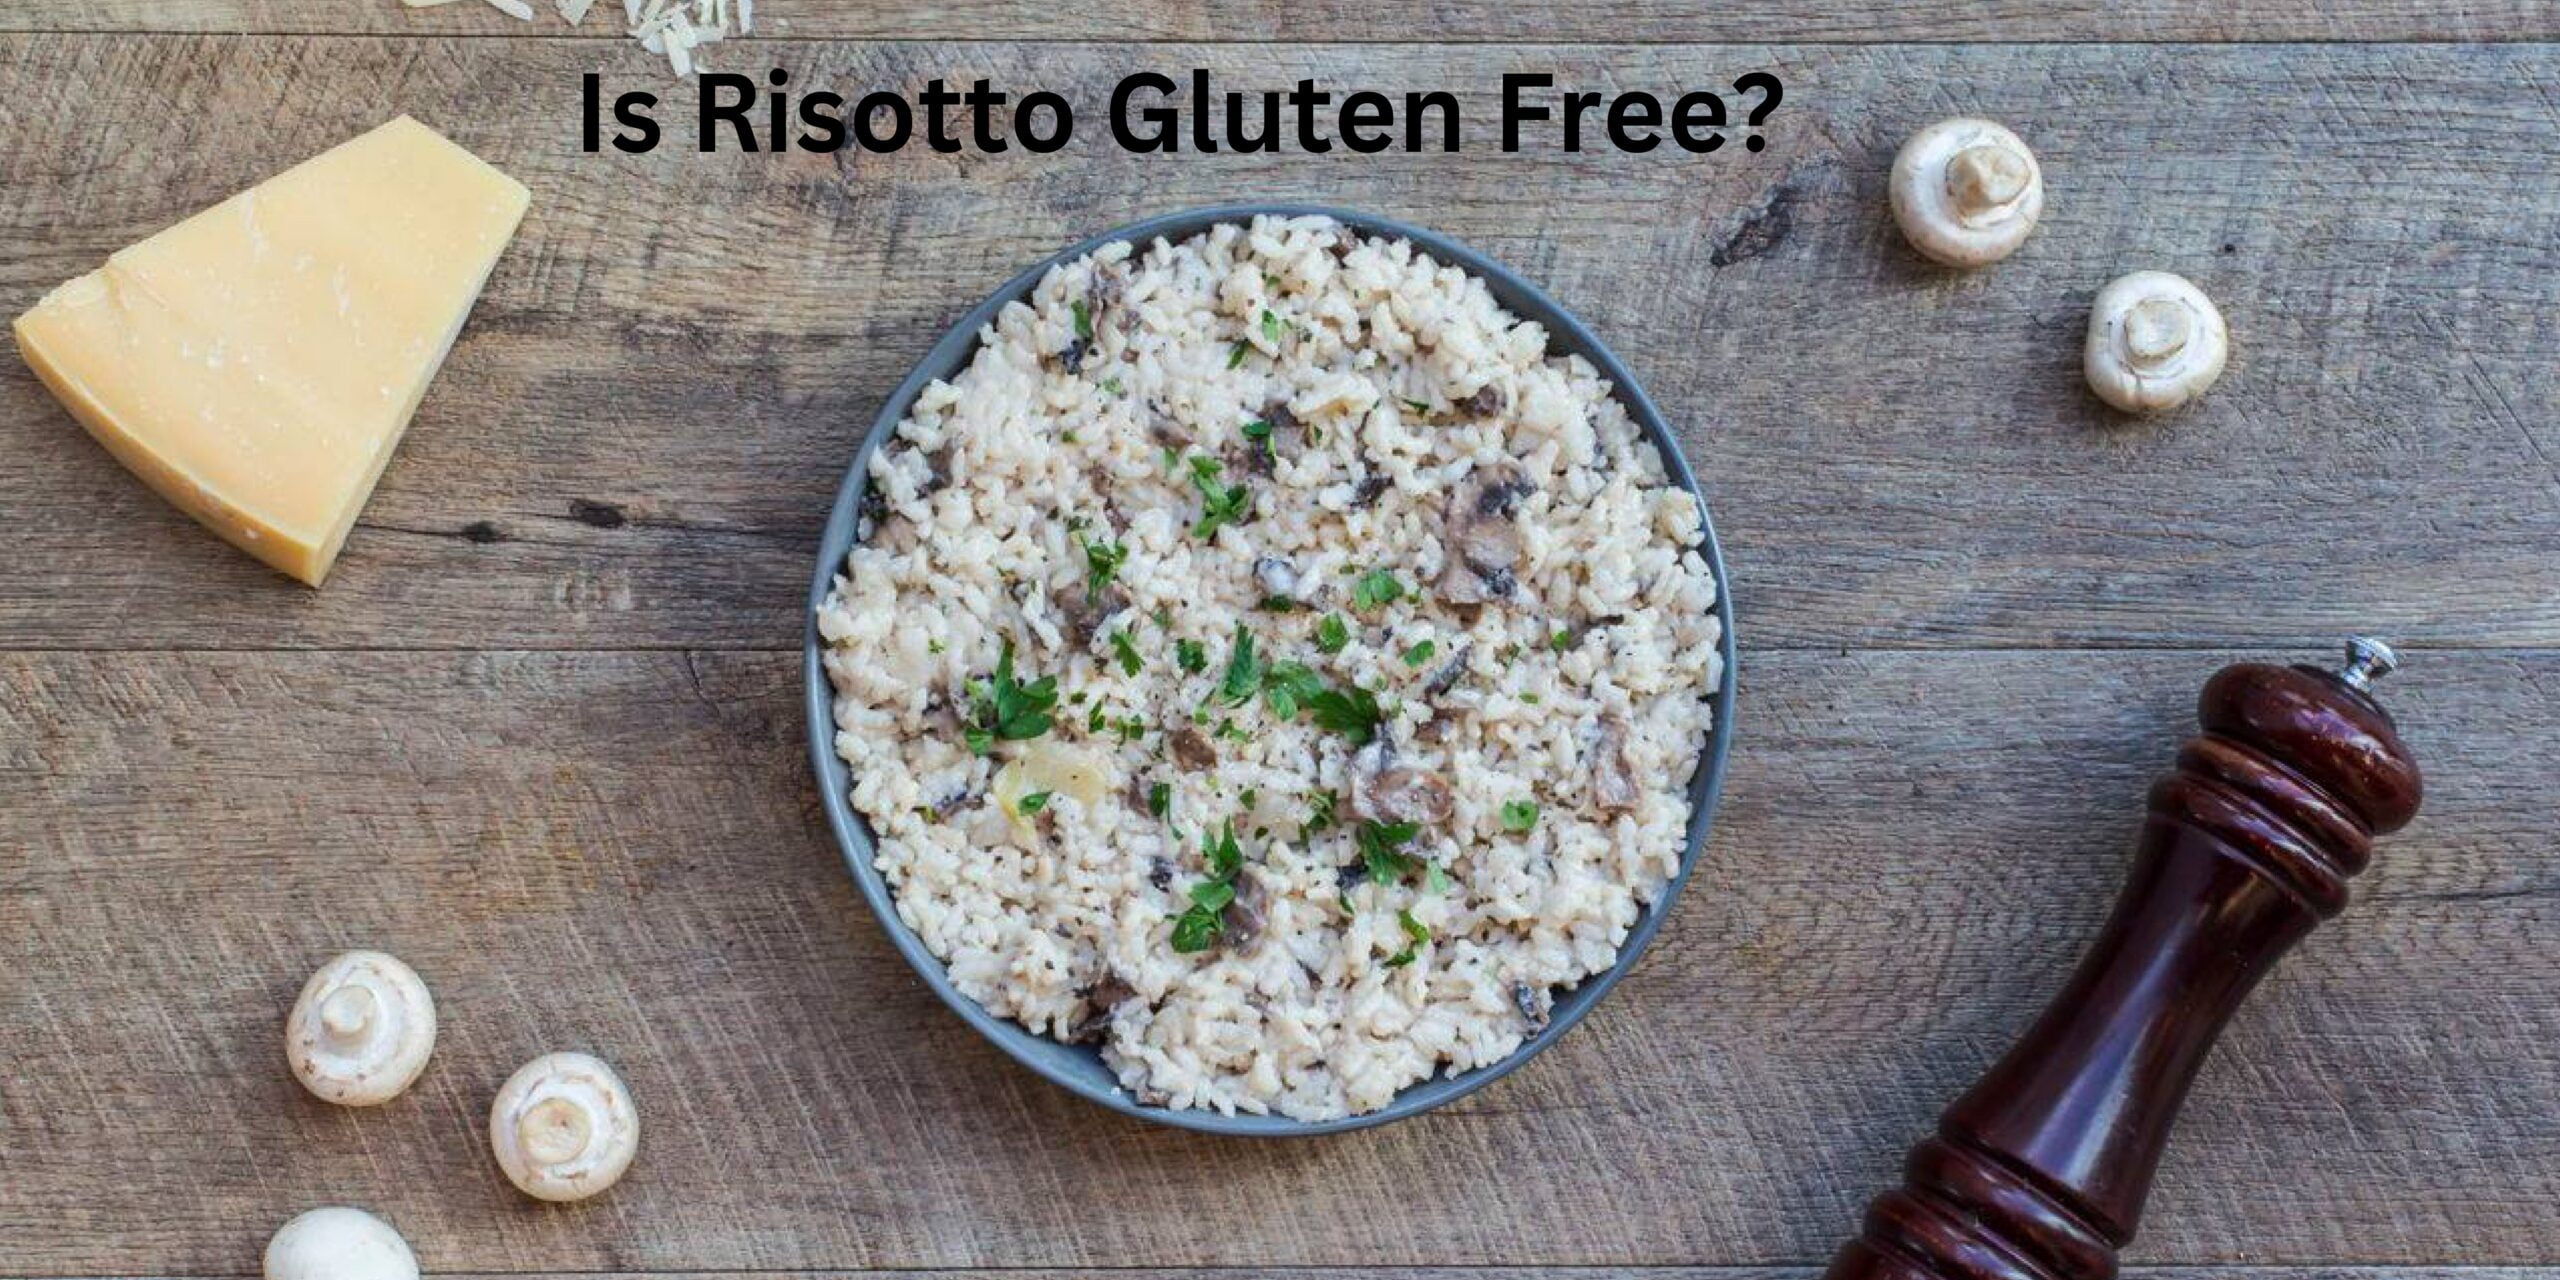 Is Risotto Gluten Free?